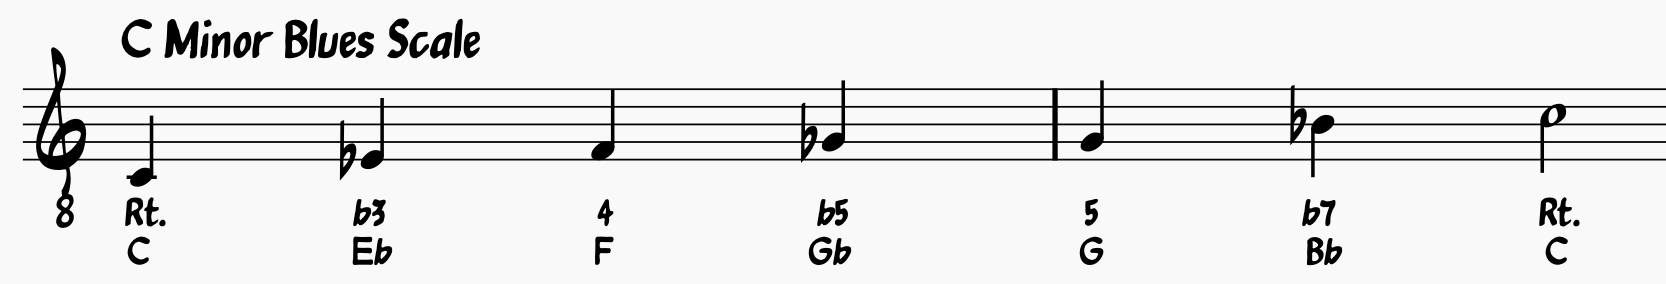 Blues Scale Guide: C Minor Blues Scale with a Gb "blue note"